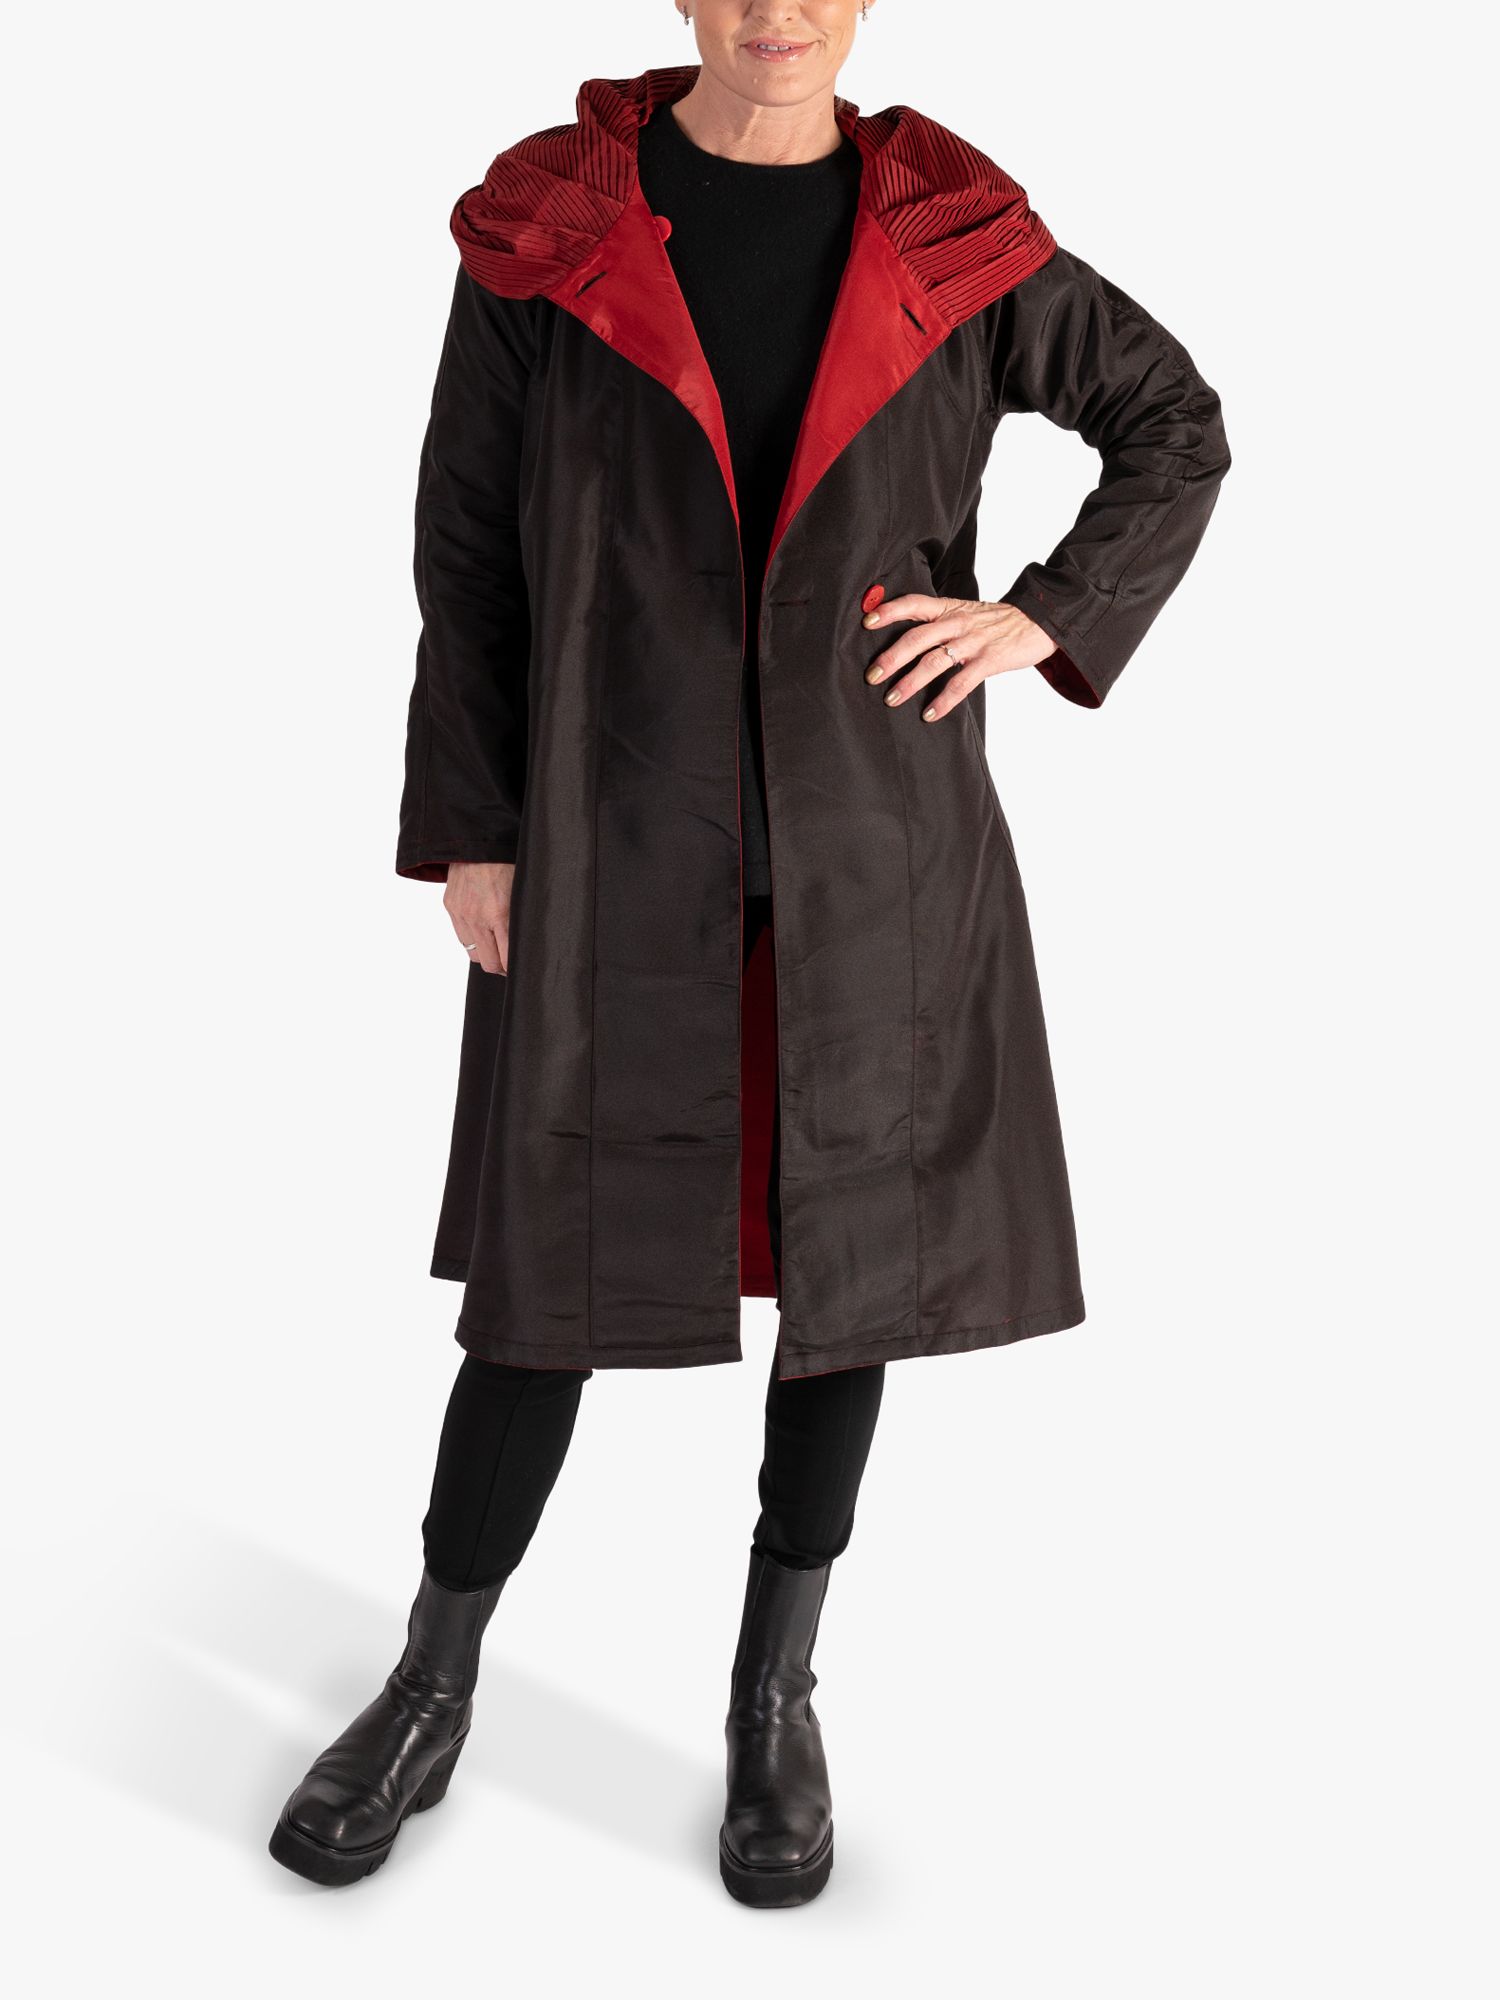 Buy chesca Accordian Collar Hooded Reversible Raincoat Online at johnlewis.com